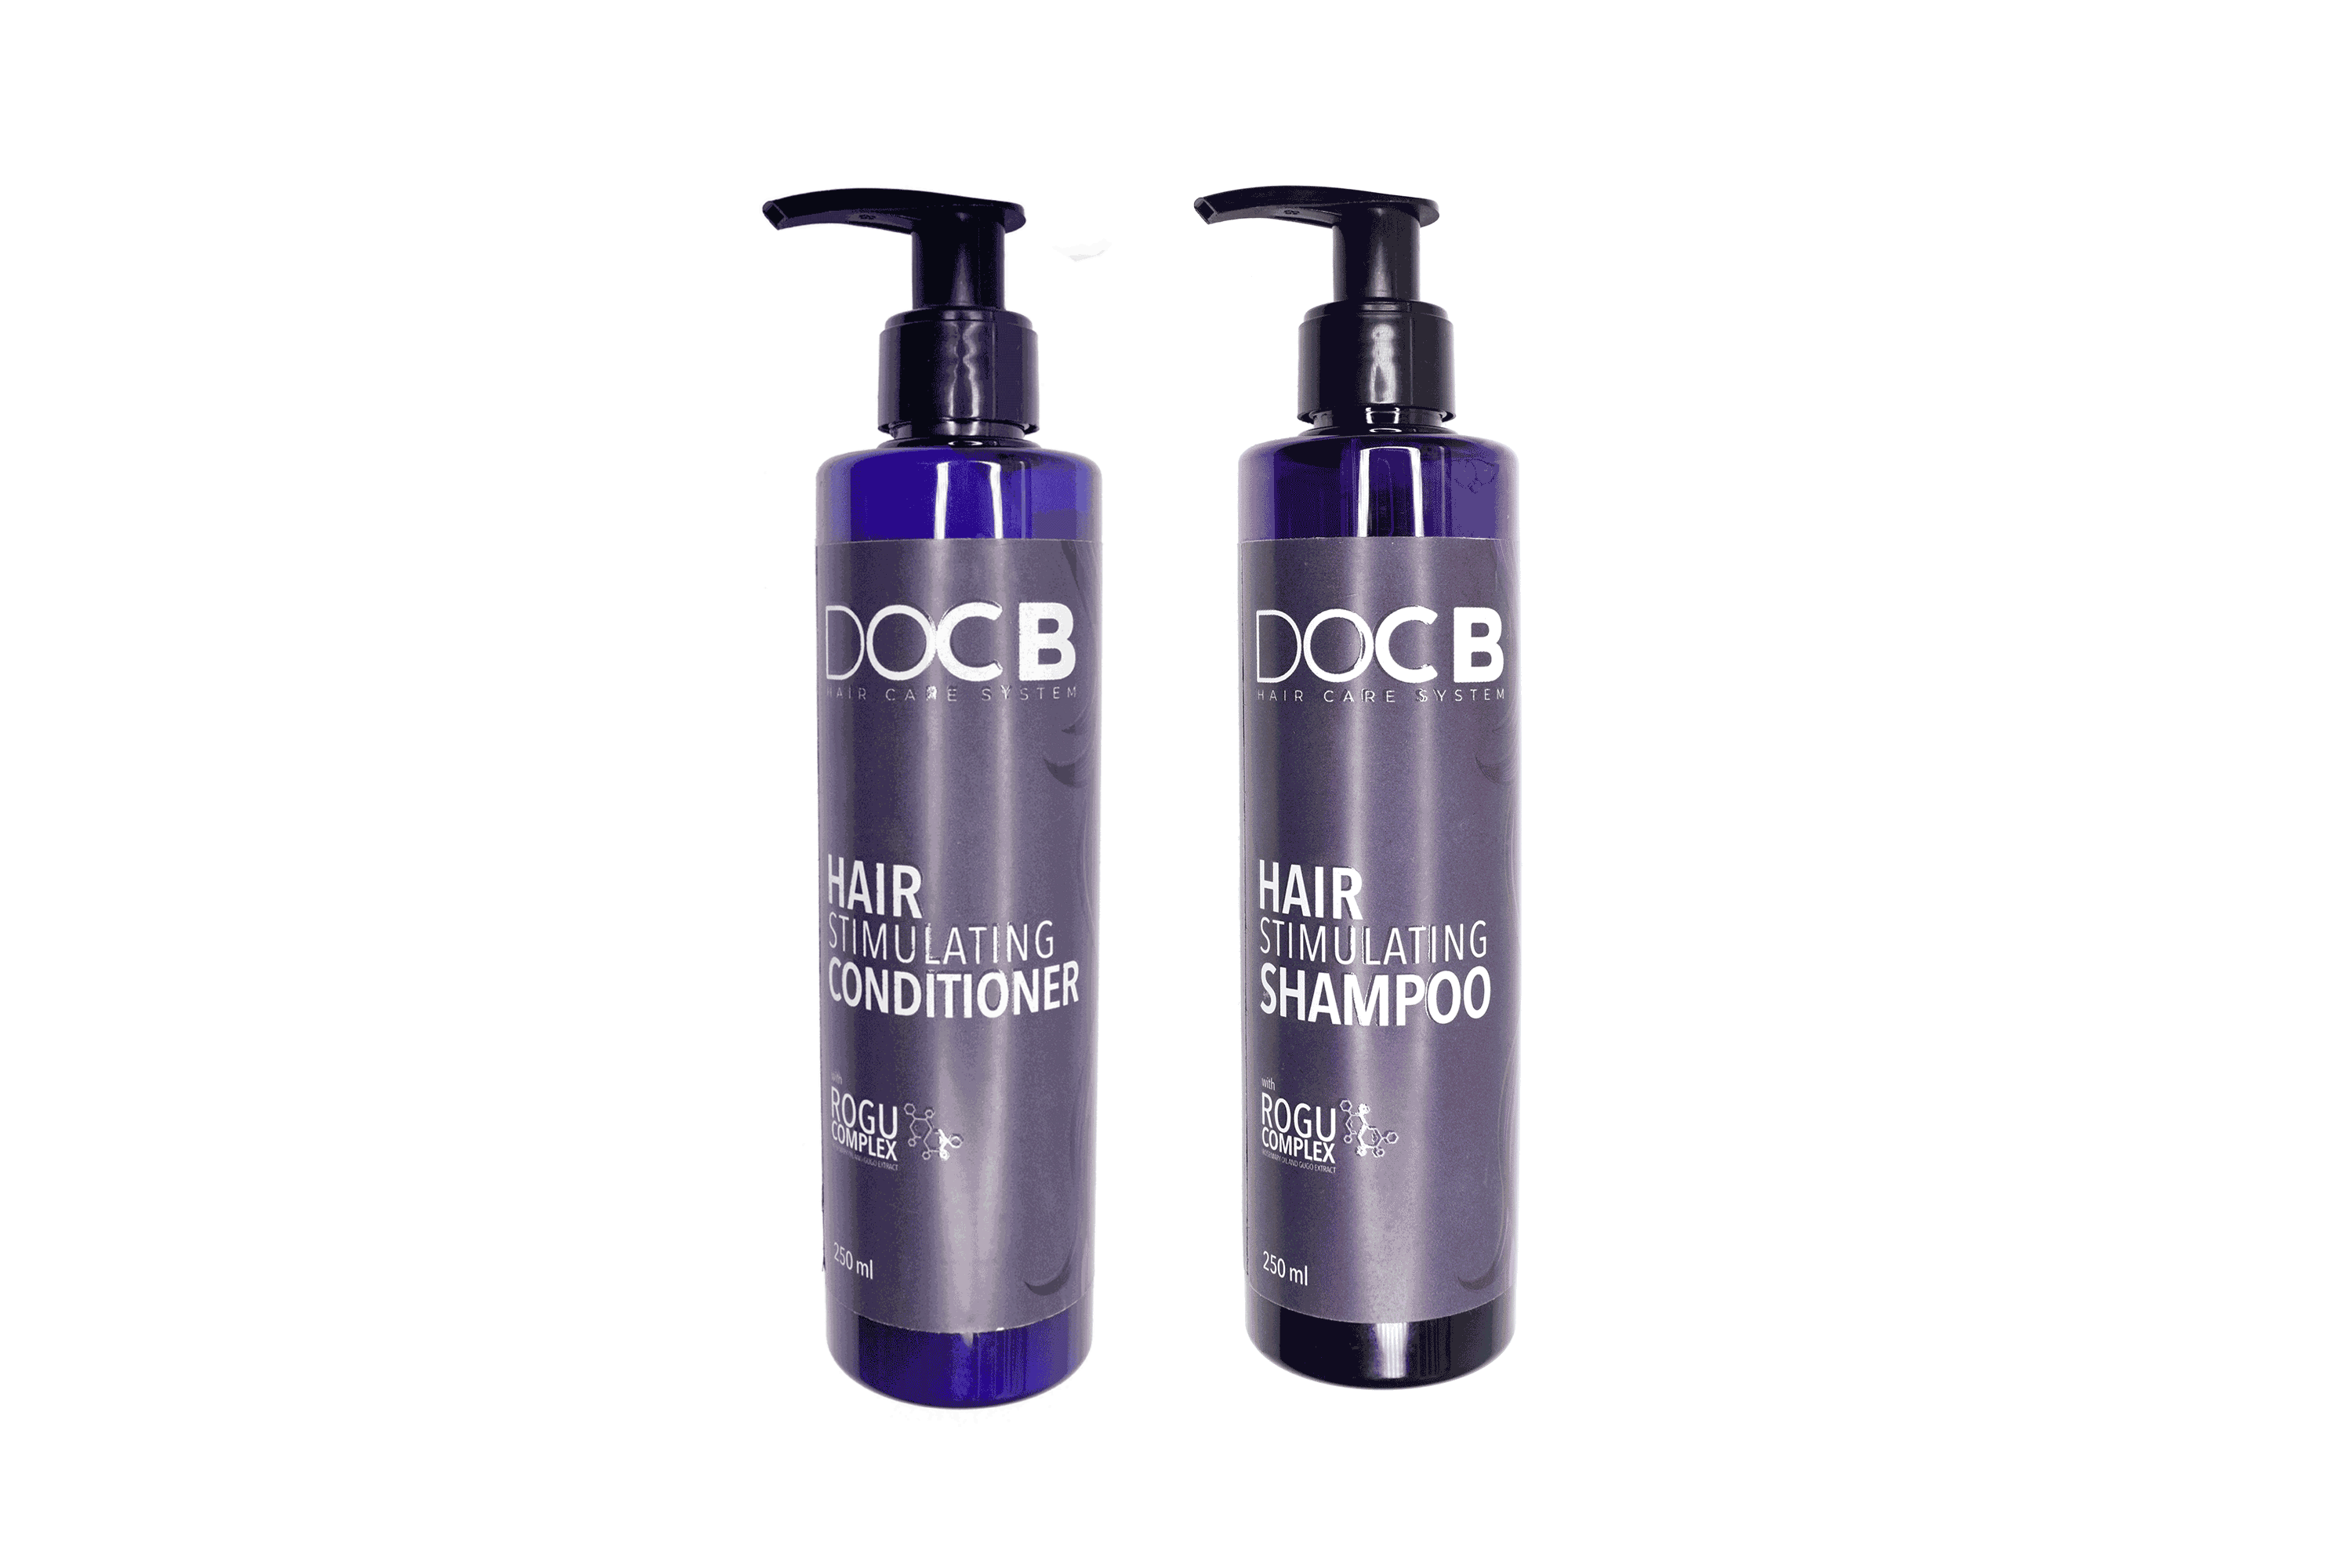 Doc B Hair Care System Shampoo and Conditioner | Bioessence